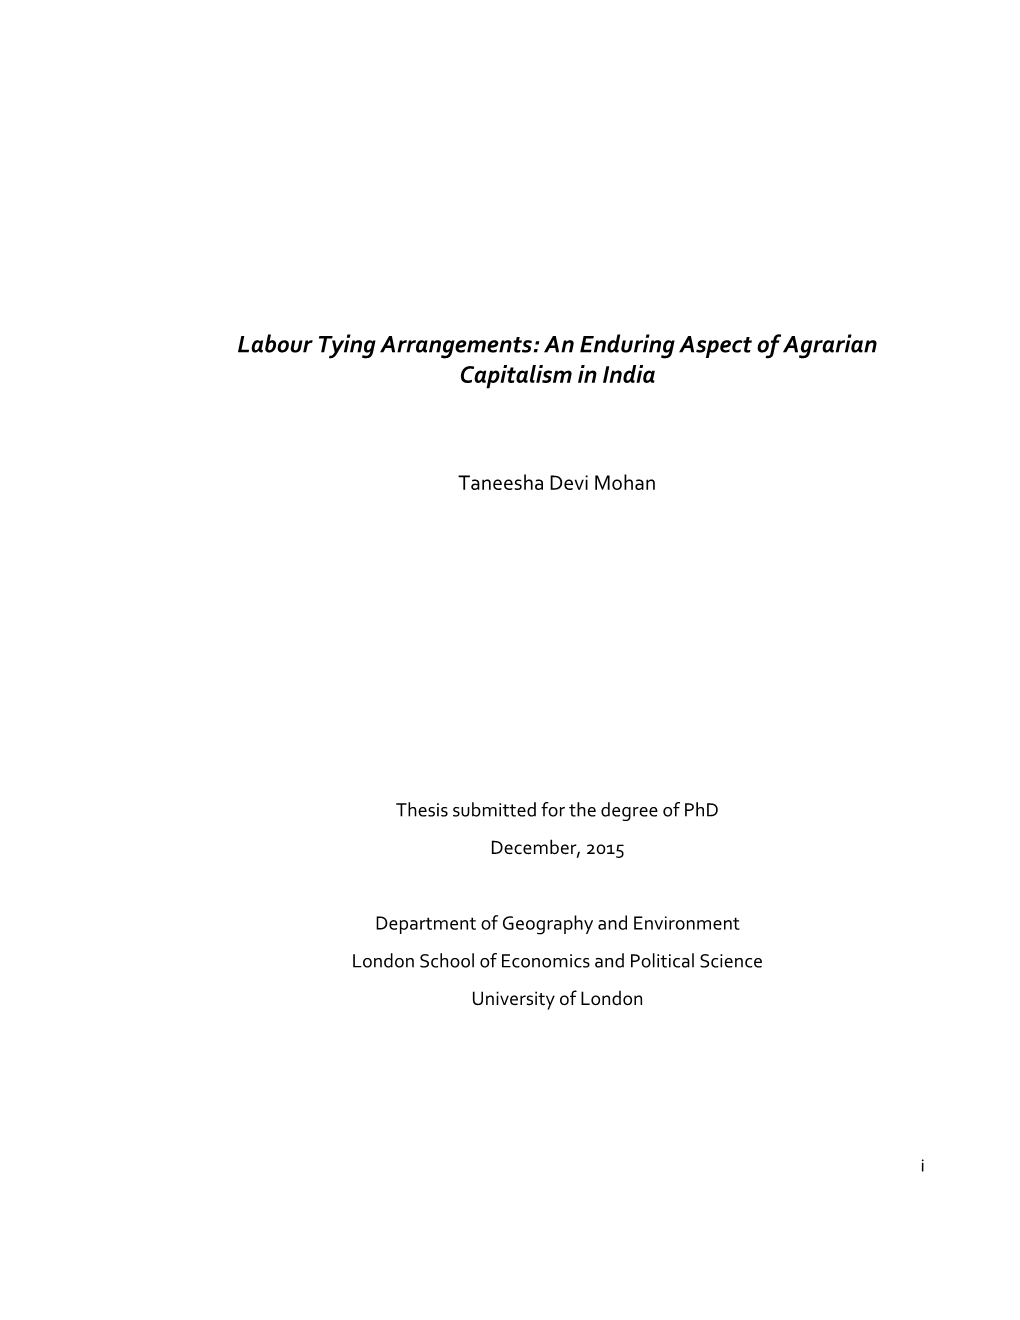 Labour Tying Arrangements: an Enduring Aspect of Agrarian Capitalism in India